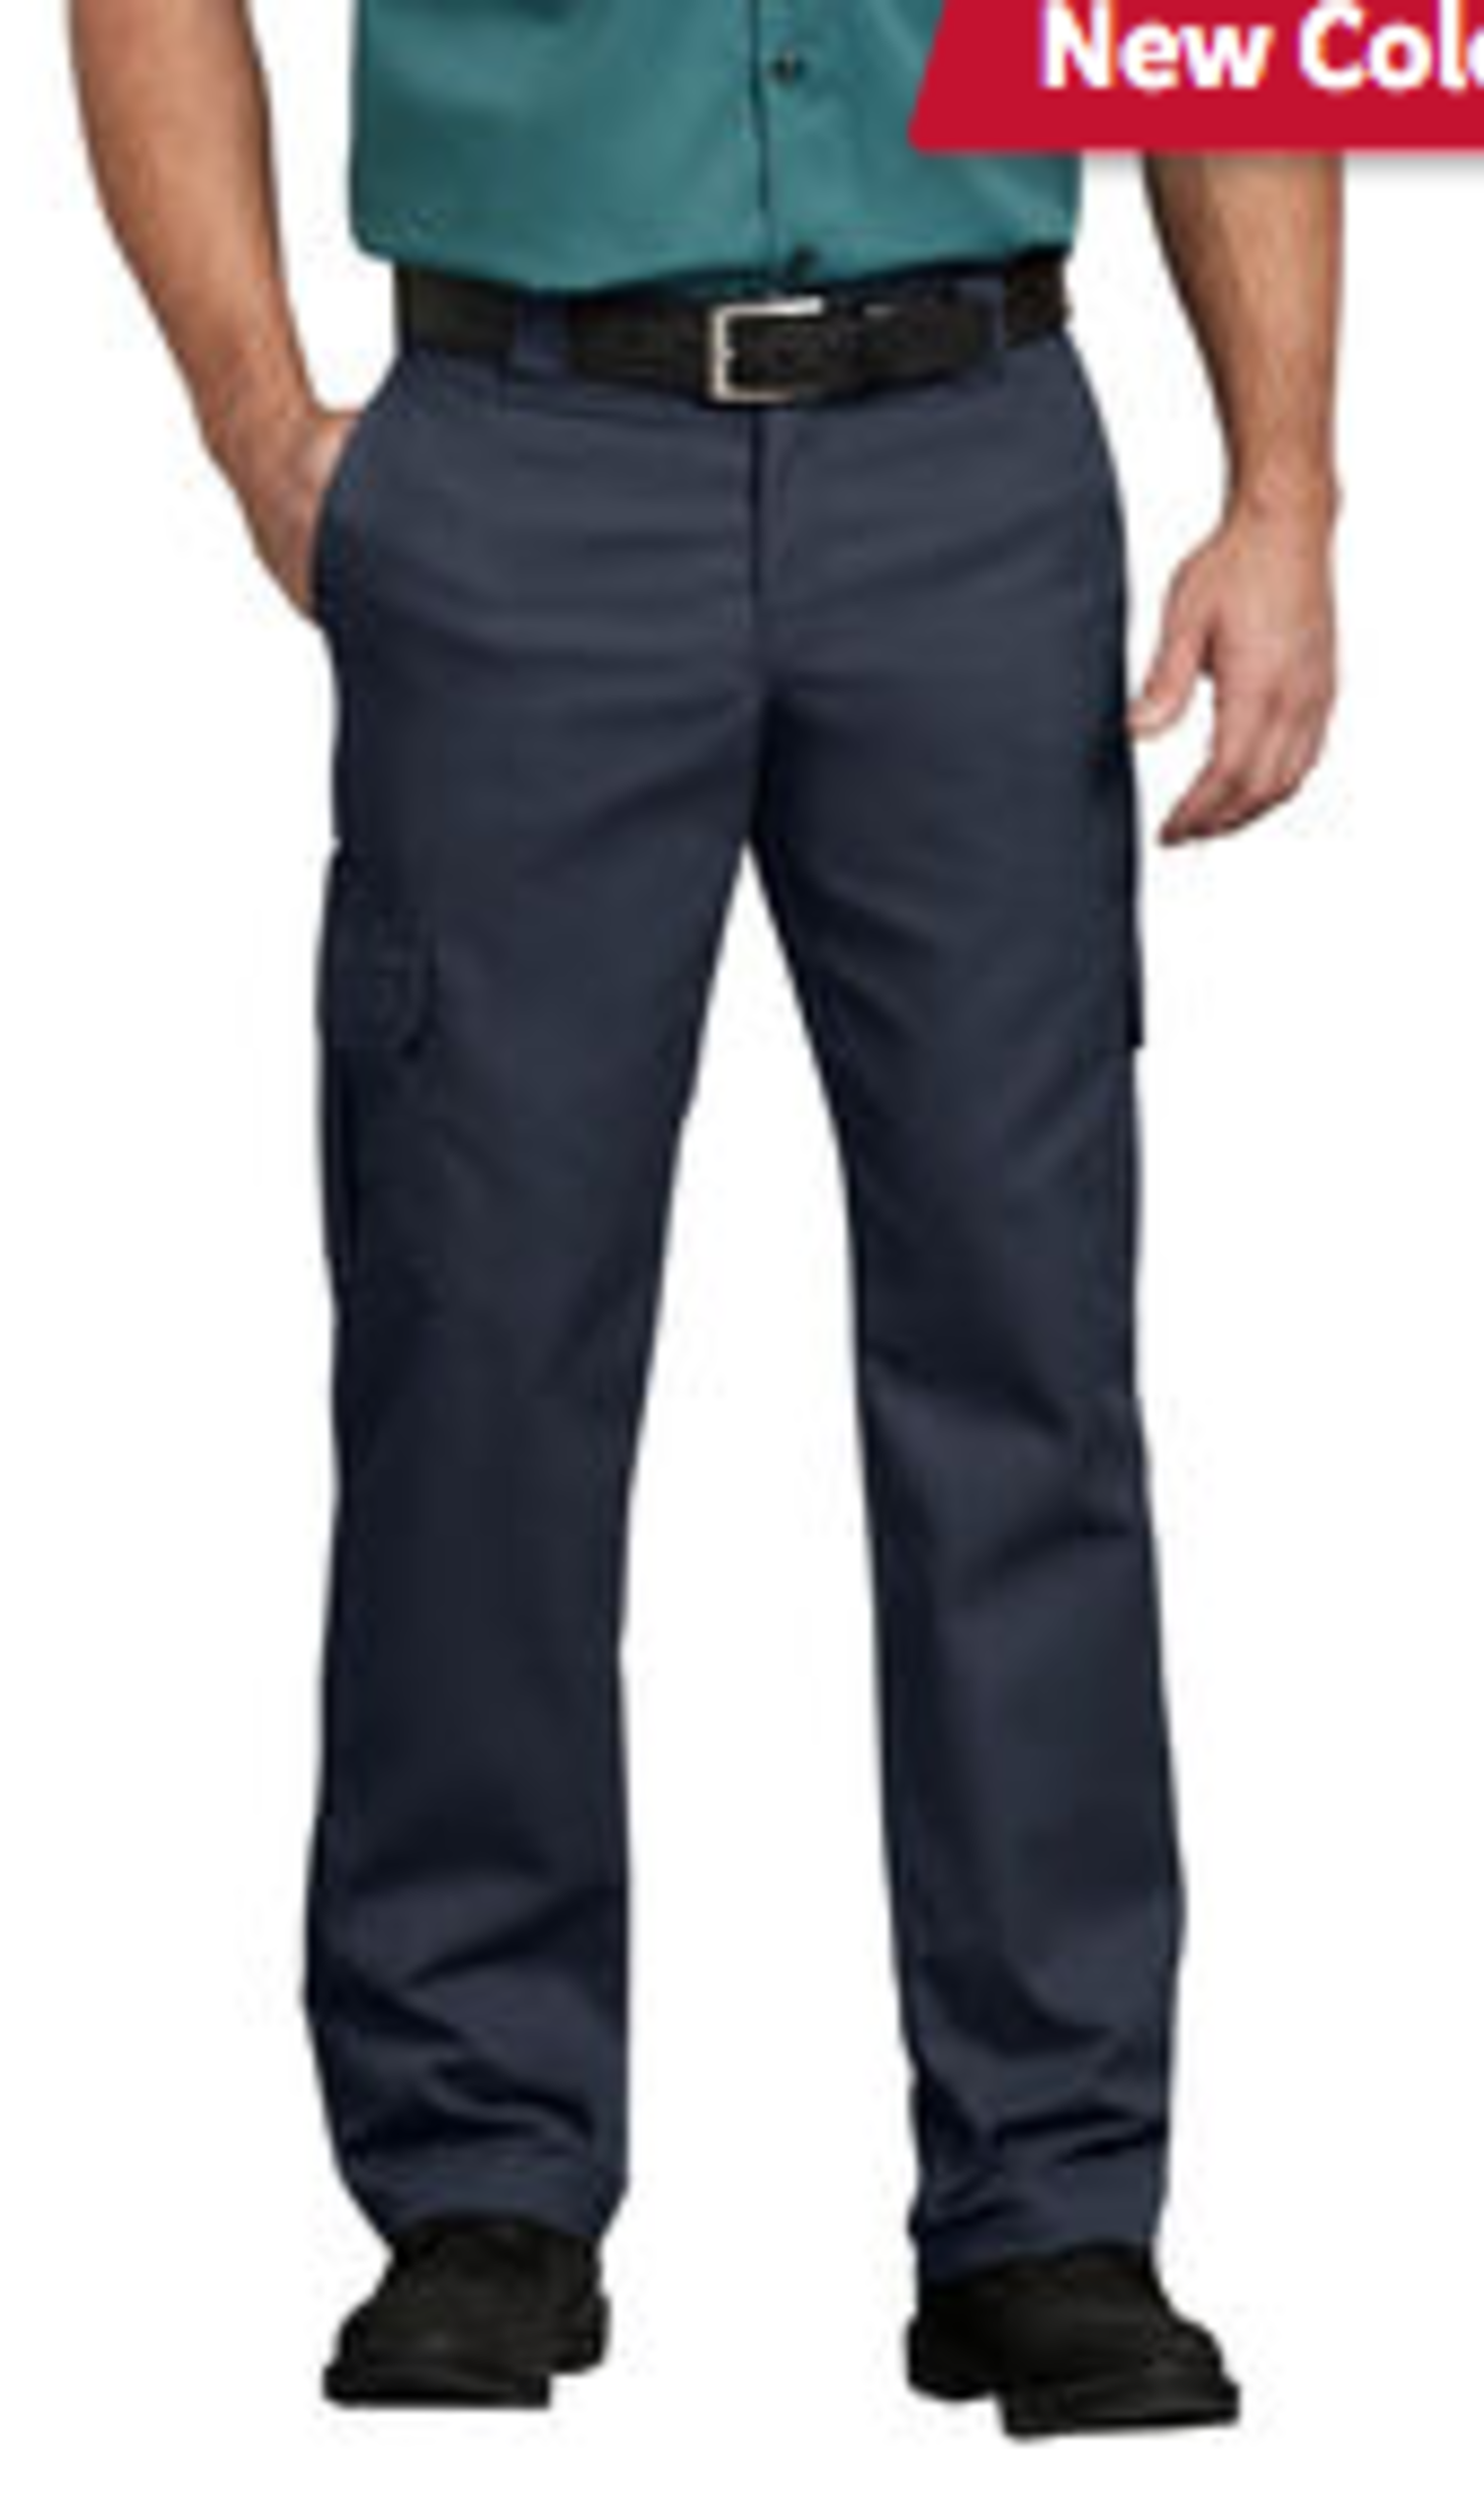 NWT Dickies Relaxed Fit Flex Cargo Pants Mens Size 44 X 32 Blue T7 | eBay